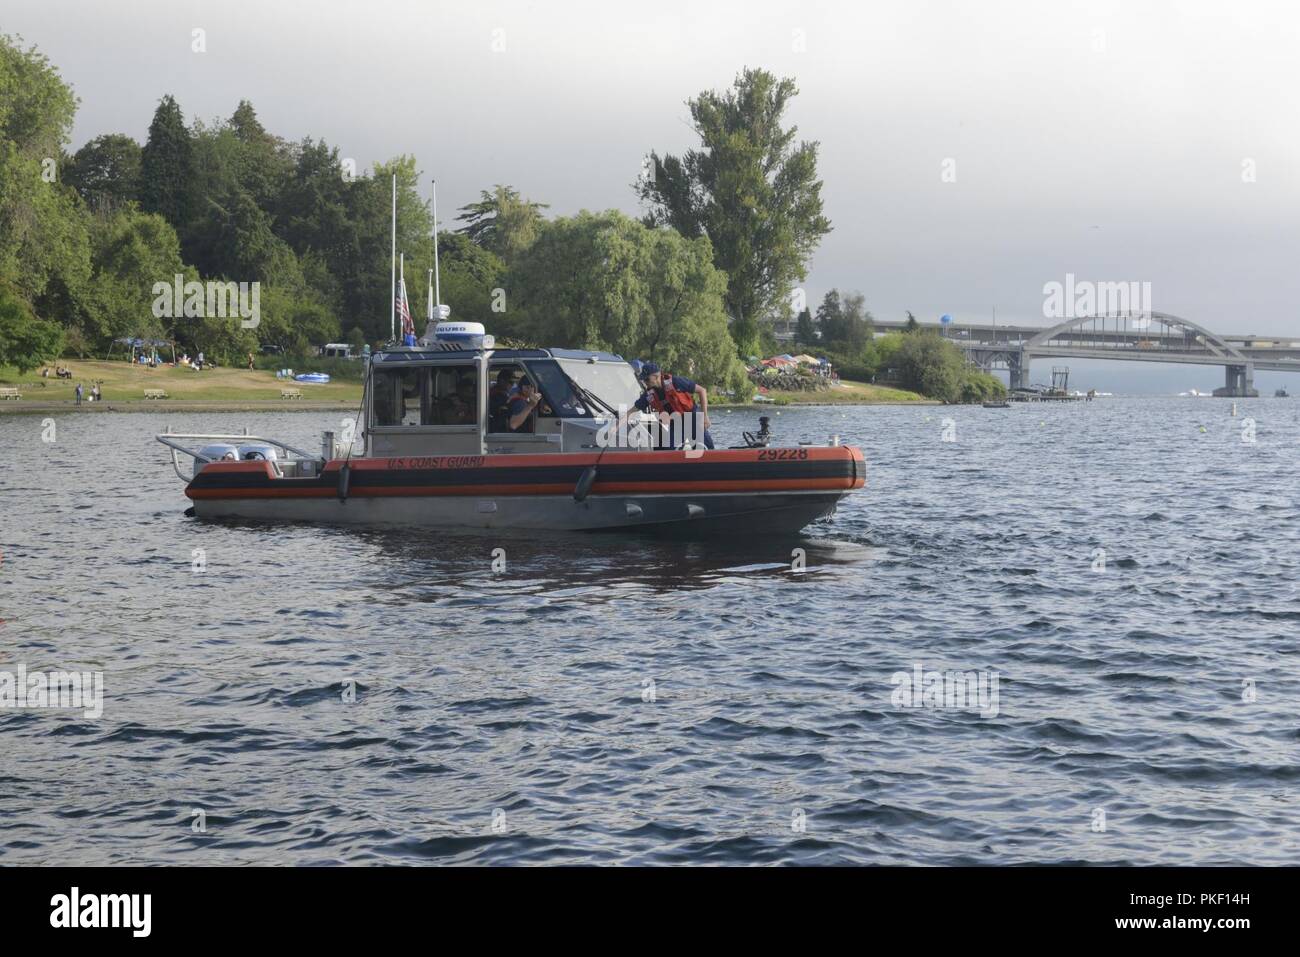 A boat crew member, aboard a 29-Foot Response Boat-Small II from Coast Guard Station Seattle, pulls a fender onto the boat as the crew heads out to conduct operations of Lake Washington in Seattle, Aug. 4, 2018.    The operations were part of a collaborative effort between the Coast Guard, local agency partners and Seafair staff to ensure safety on the water during the 69th annual Seafair Weekend Festival.    U.S. Coast Guard Stock Photo